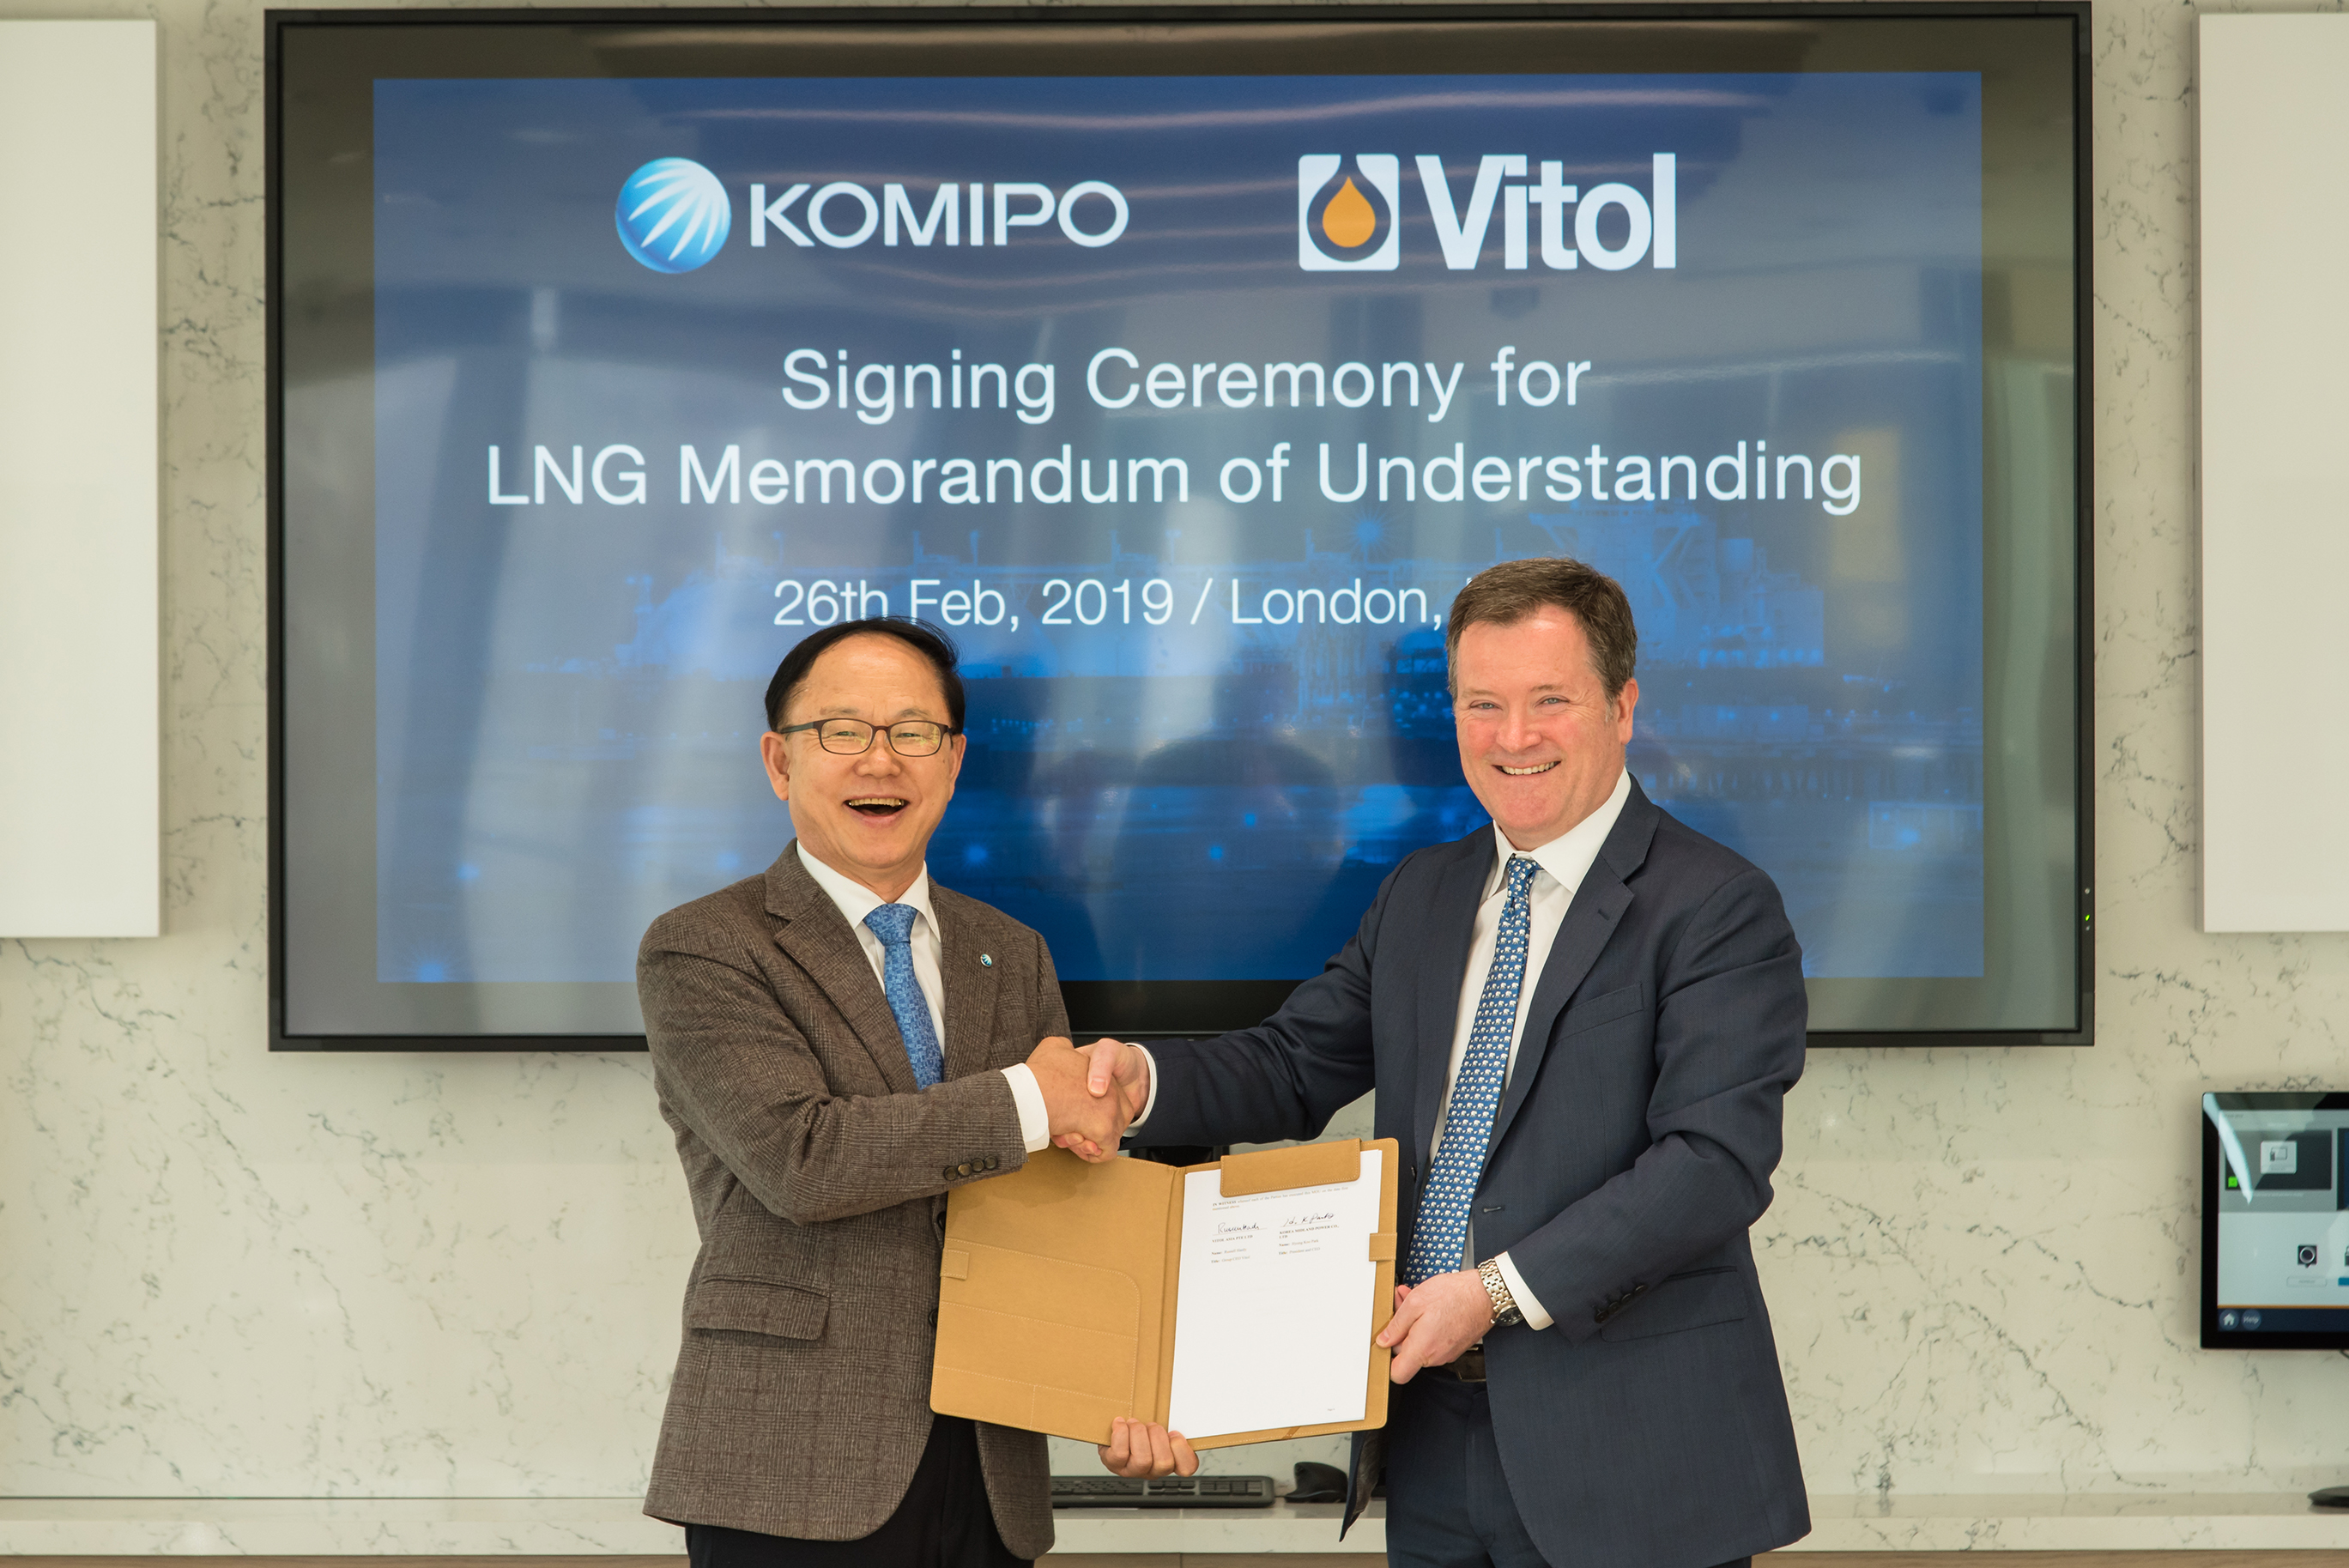 Vitol to explore LNG opportunities with KOMIPO